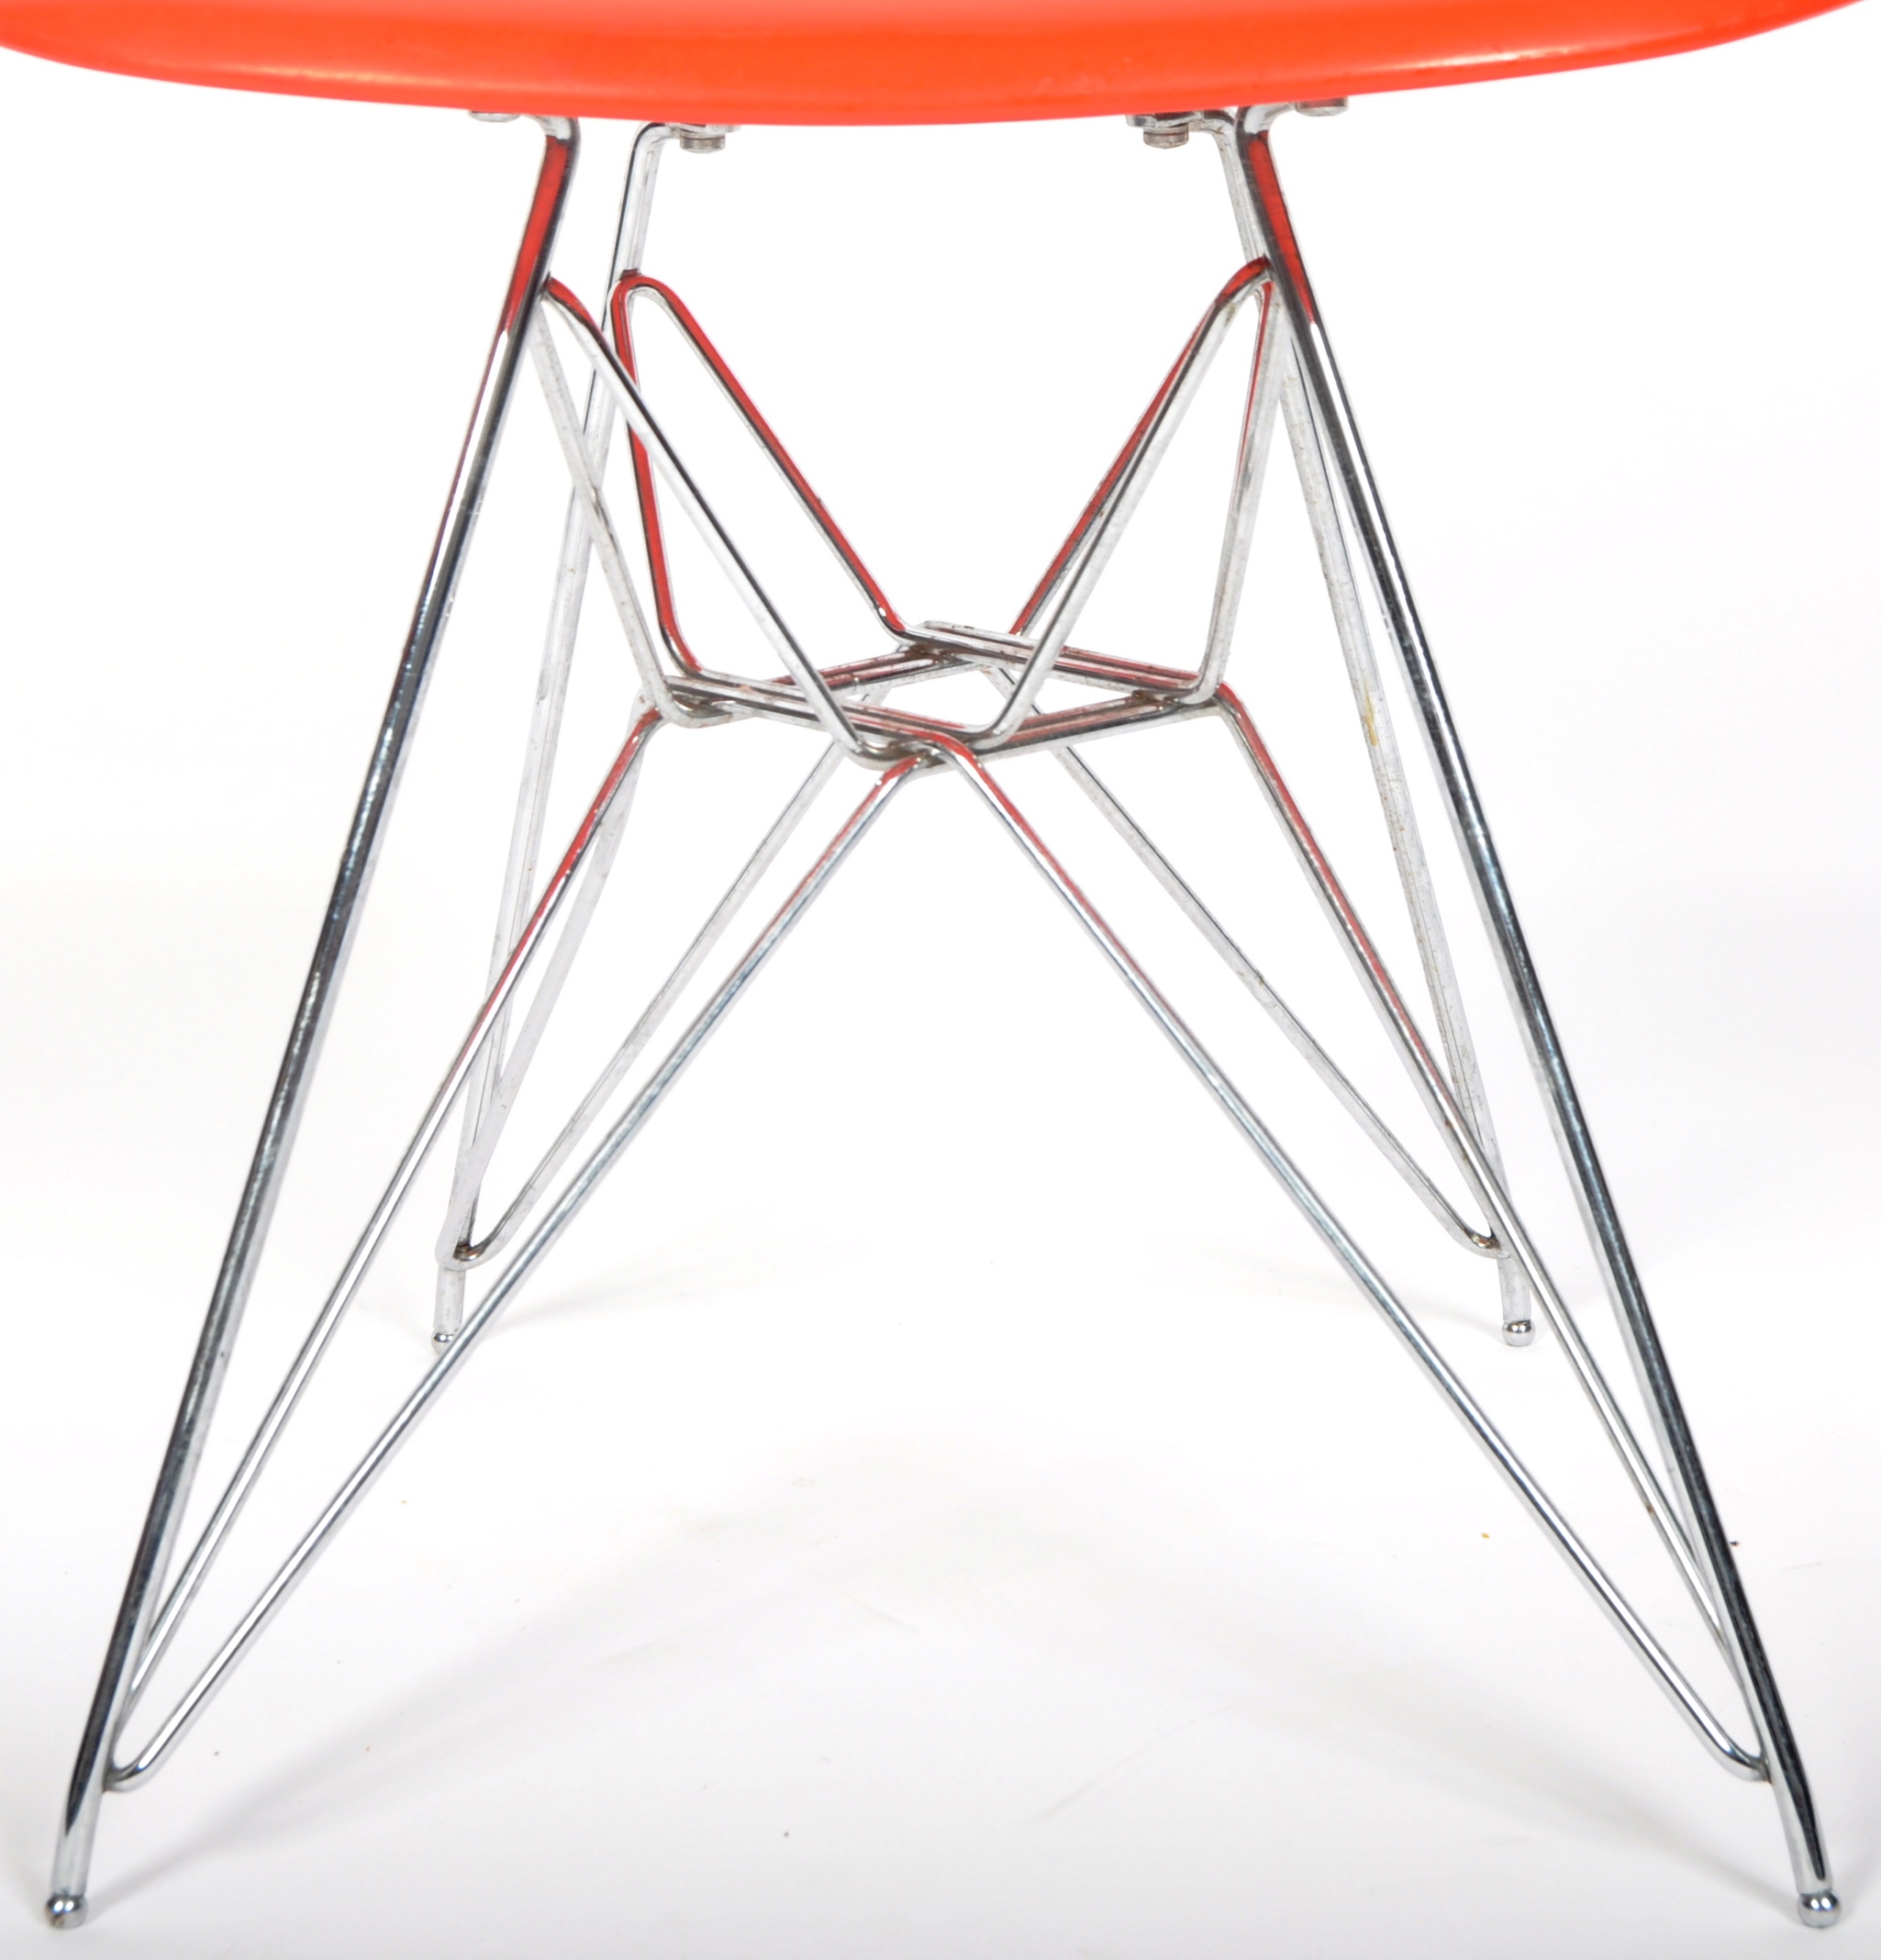 CHARLES & RAY EAMES FOR VITRA - DSR EAMES PLASTIC CHAIR - Image 5 of 10